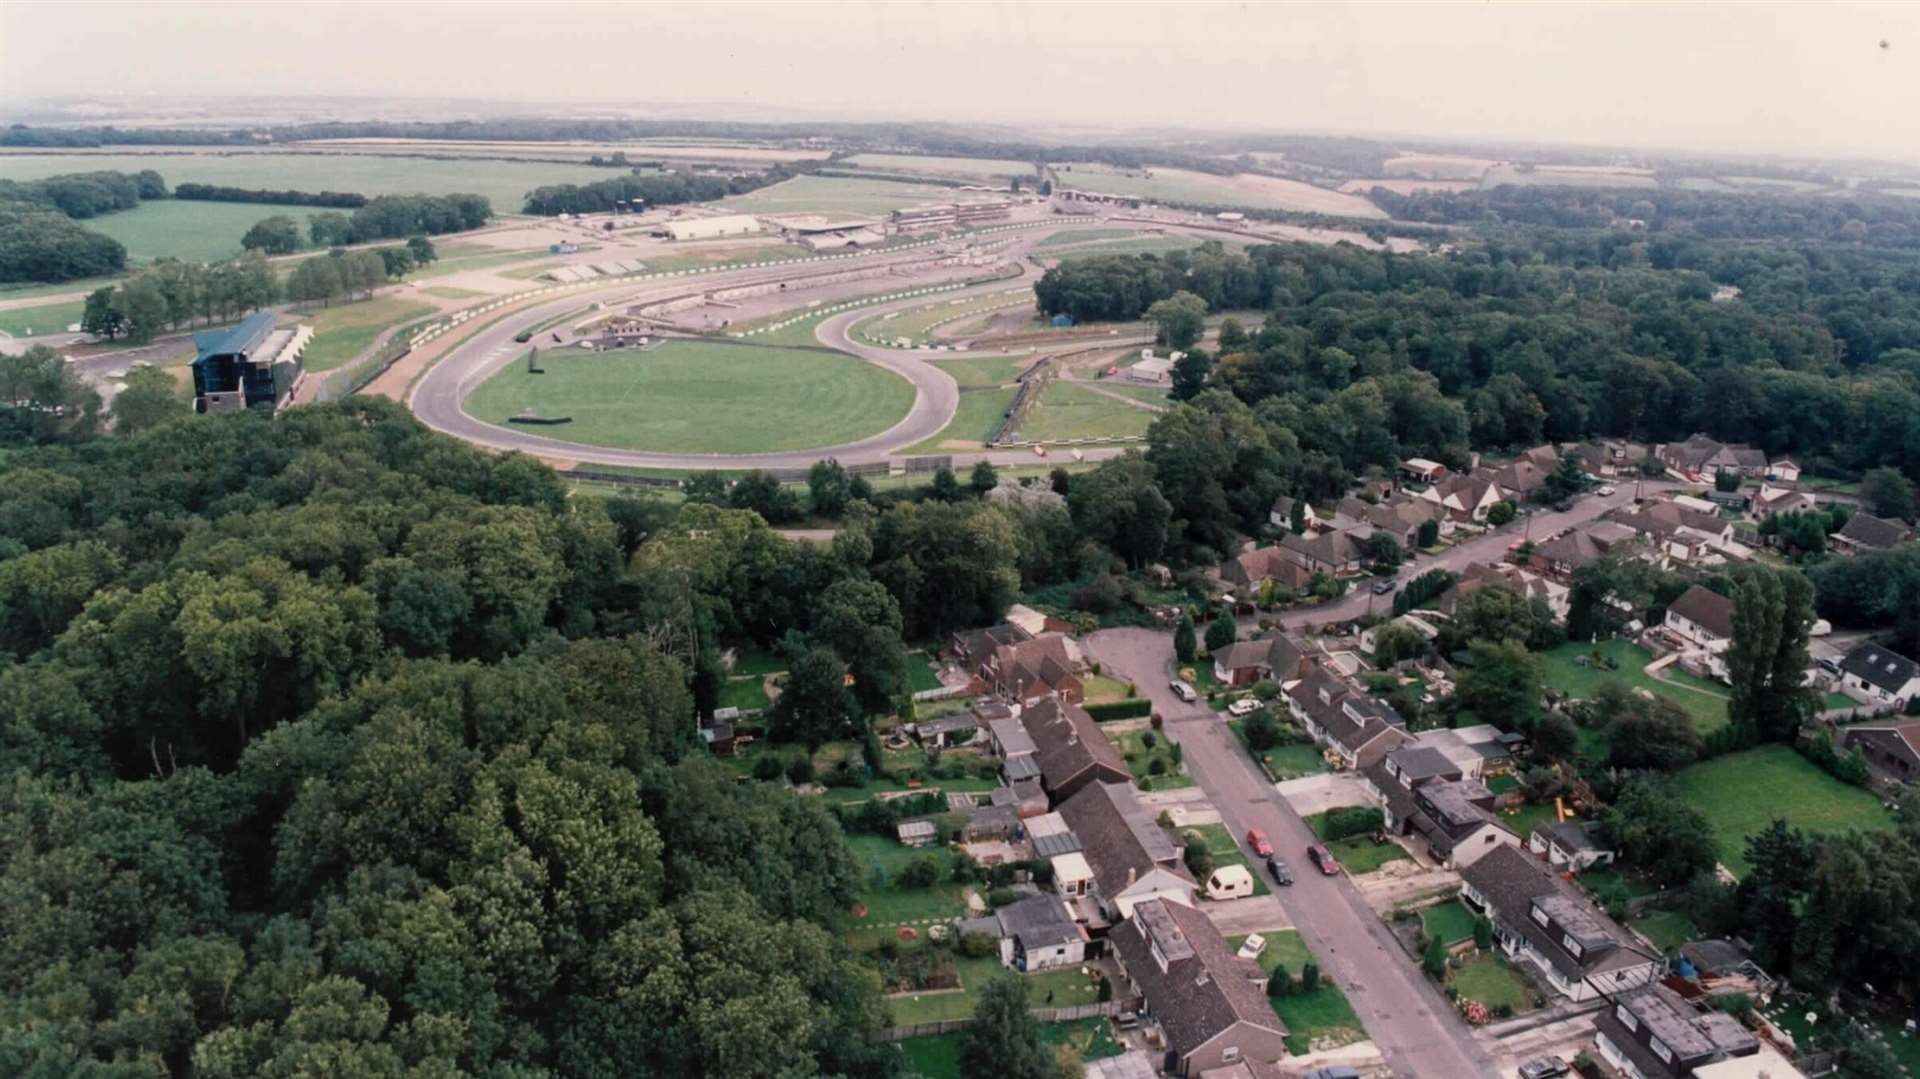 An aerial view of Brands Hatch from 1992, with part of West Kingsdown in the foreground